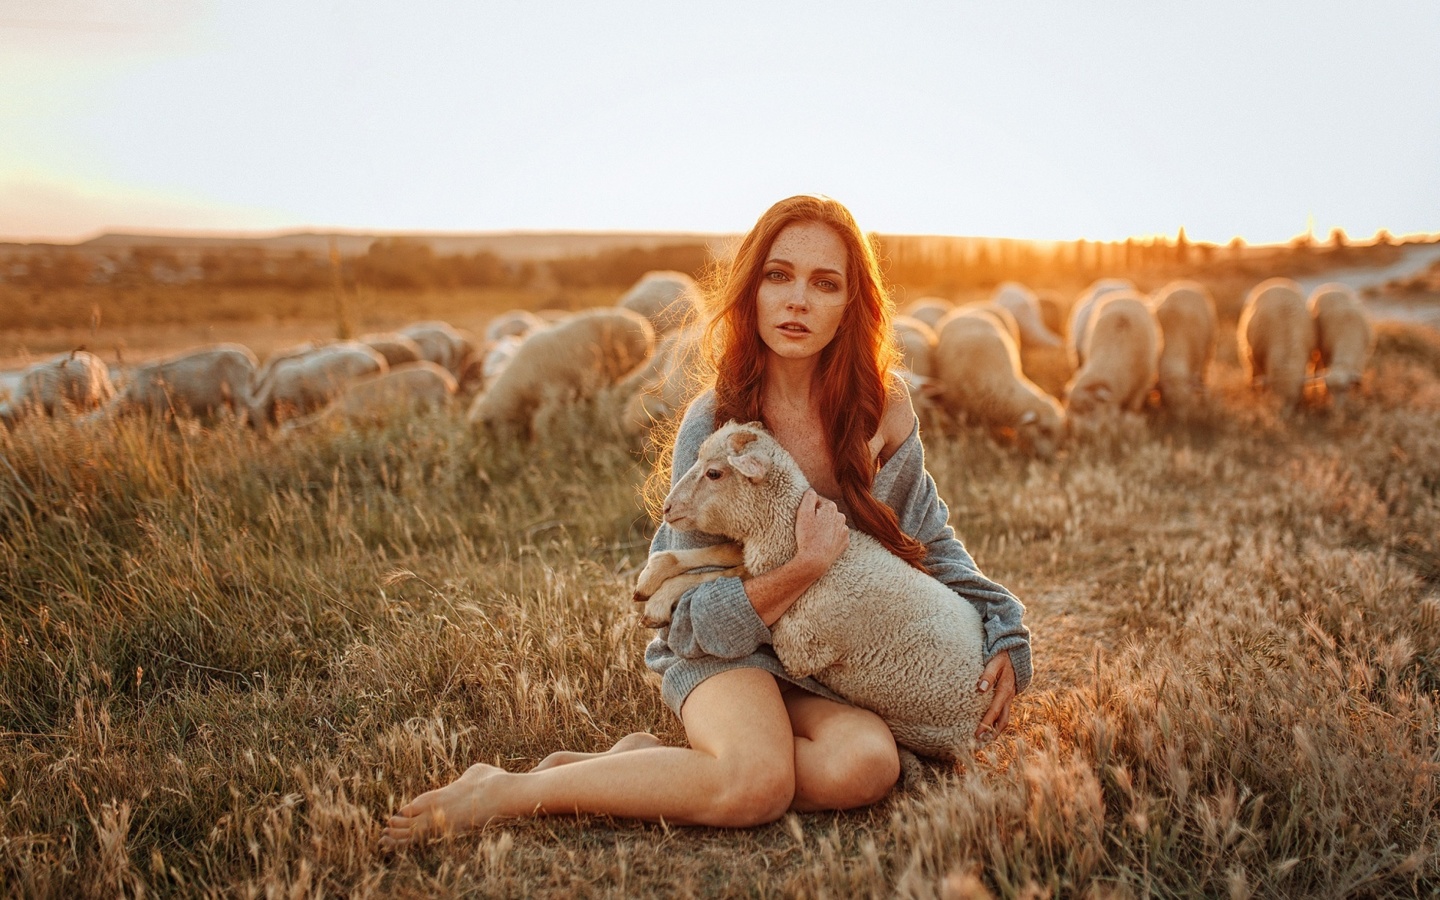 Girl with Sheep wallpaper 1440x900